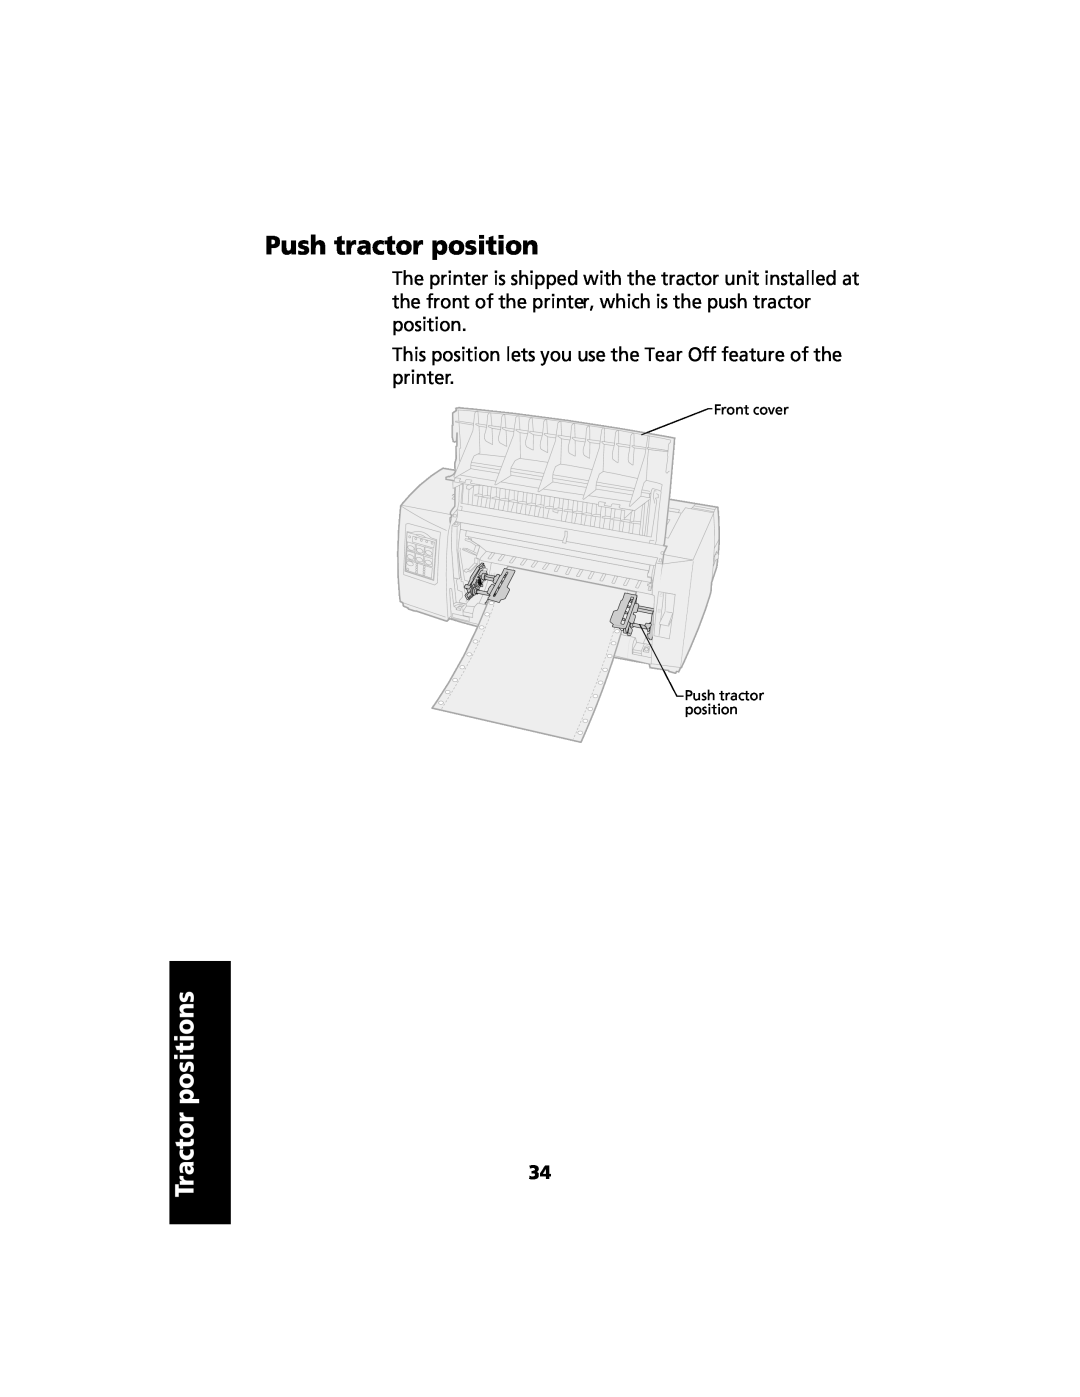 Lexmark 2480 Push tractor position, Tractor positions, This position lets you use the Tear Off feature of the printer 